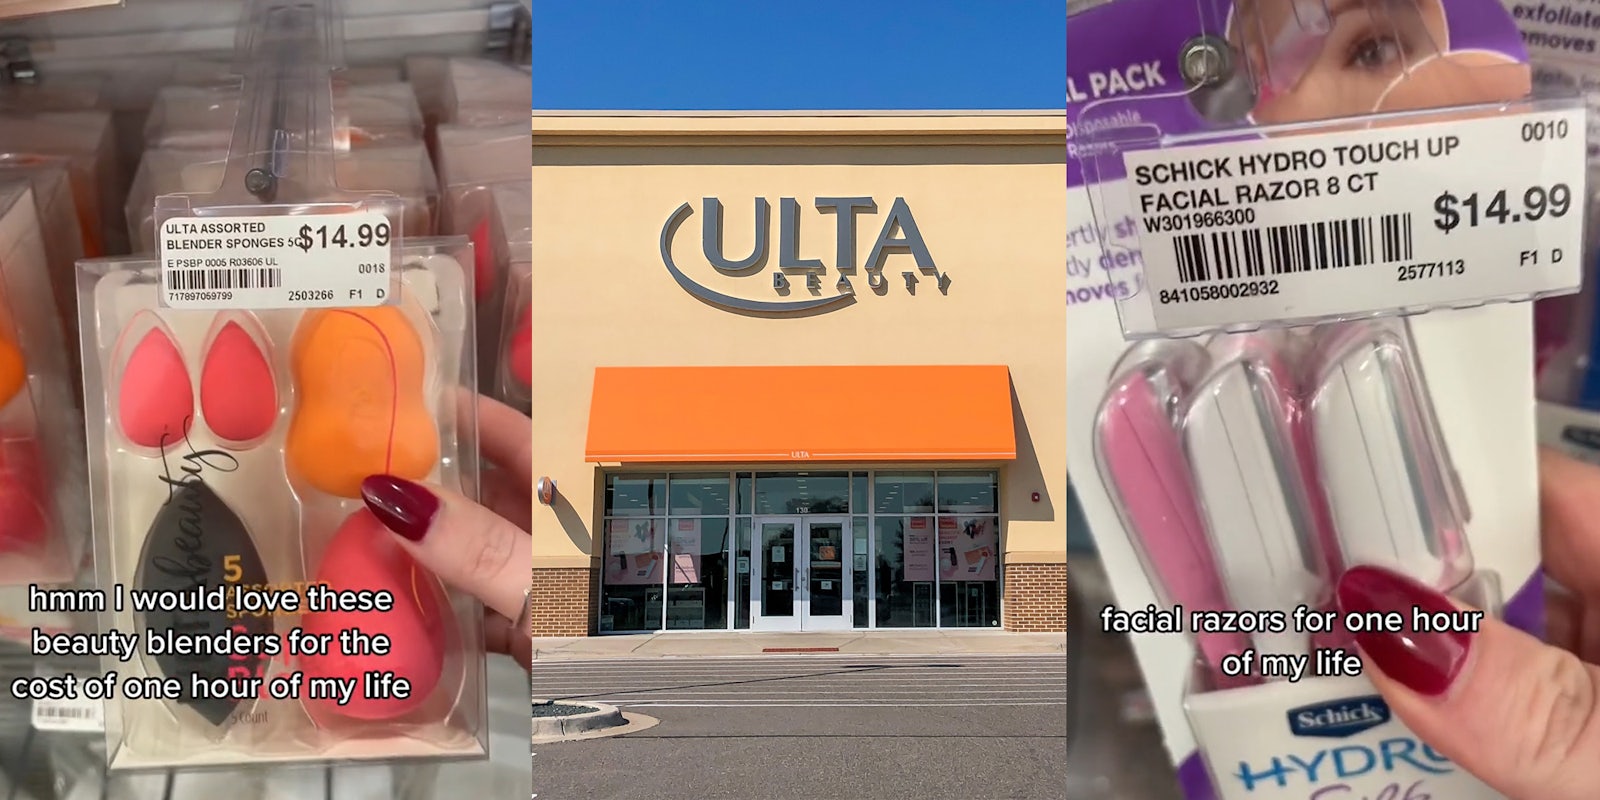 woman shopping at Ulta holding beauty blenders with caption 'hmm I would love these beauty blenders for the cost of one hour of my life' (l) Ulta building with sign (c) woman shopping at Ulta holding facial razors with caption 'facial razors for one hour of my life' (r)